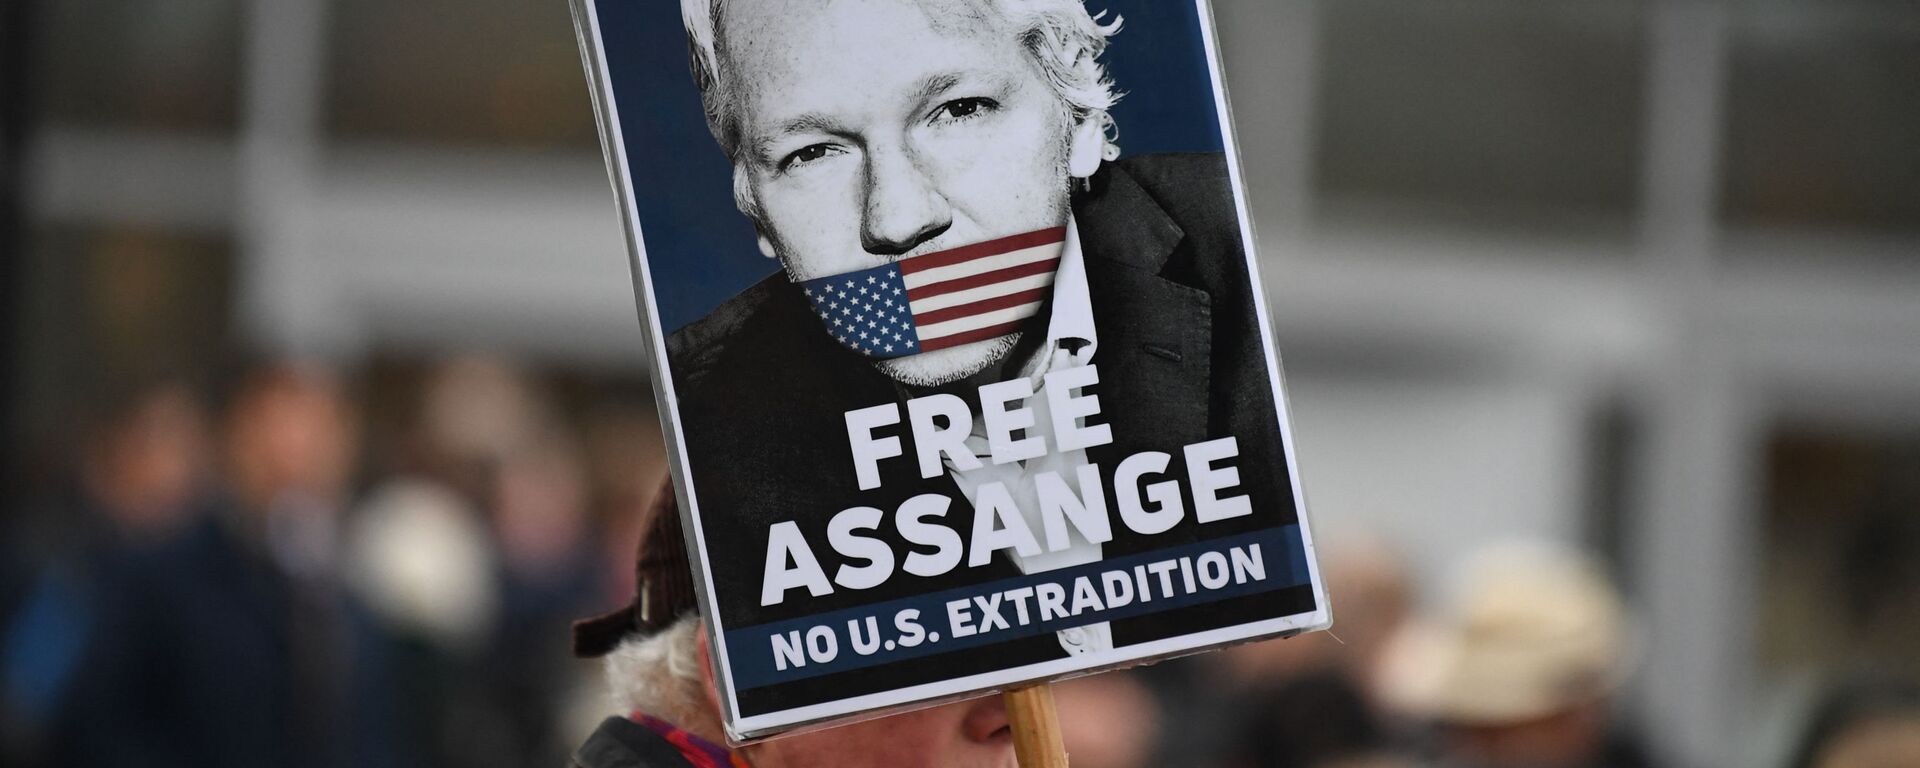 A supporter of WikiLeaks founder Julian Assange holds a placard calling for his freedom outside Woolwich Crown Court and HMP Belmarsh prison in southeast London on February 24, 2020, ahead of the opening of the trial to hear a US request for Assange's extradition - Sputnik International, 1920, 11.04.2023